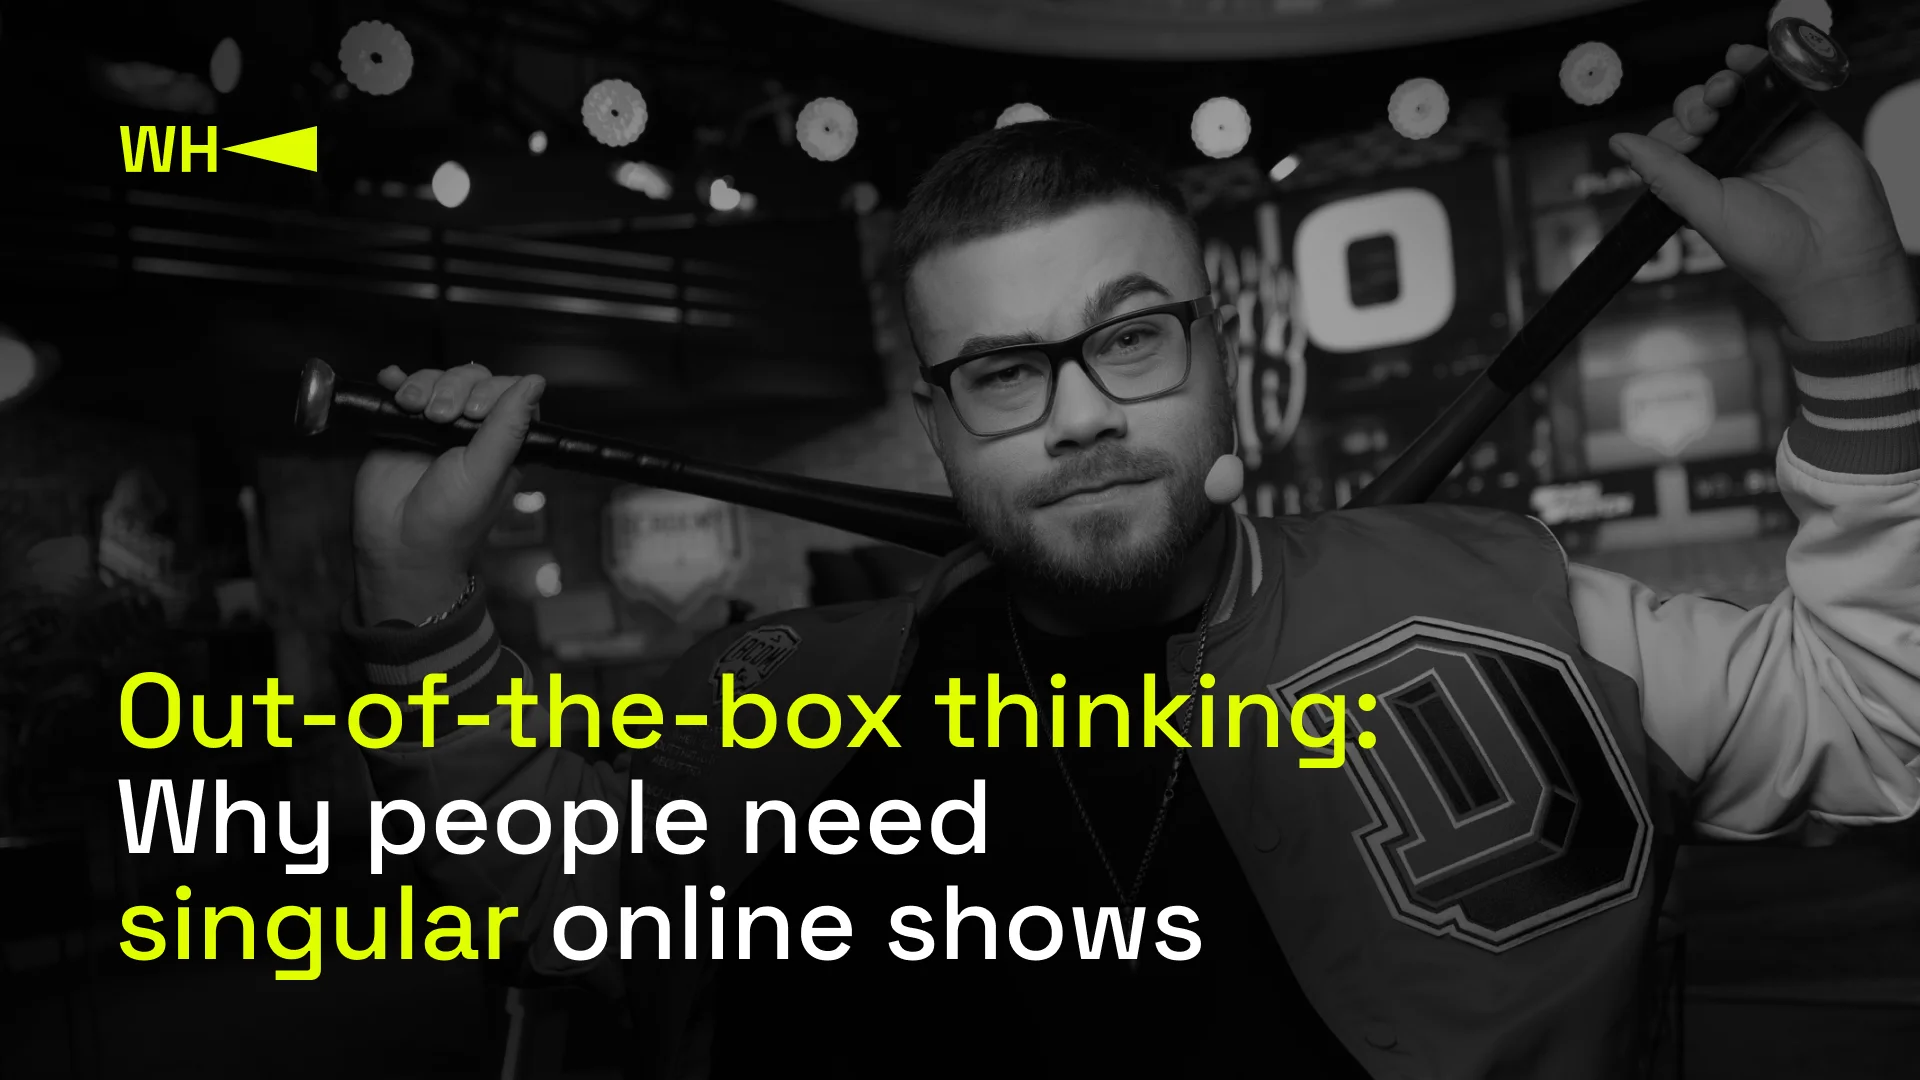 Out-of-the-box thinking: Why people need singular online shows